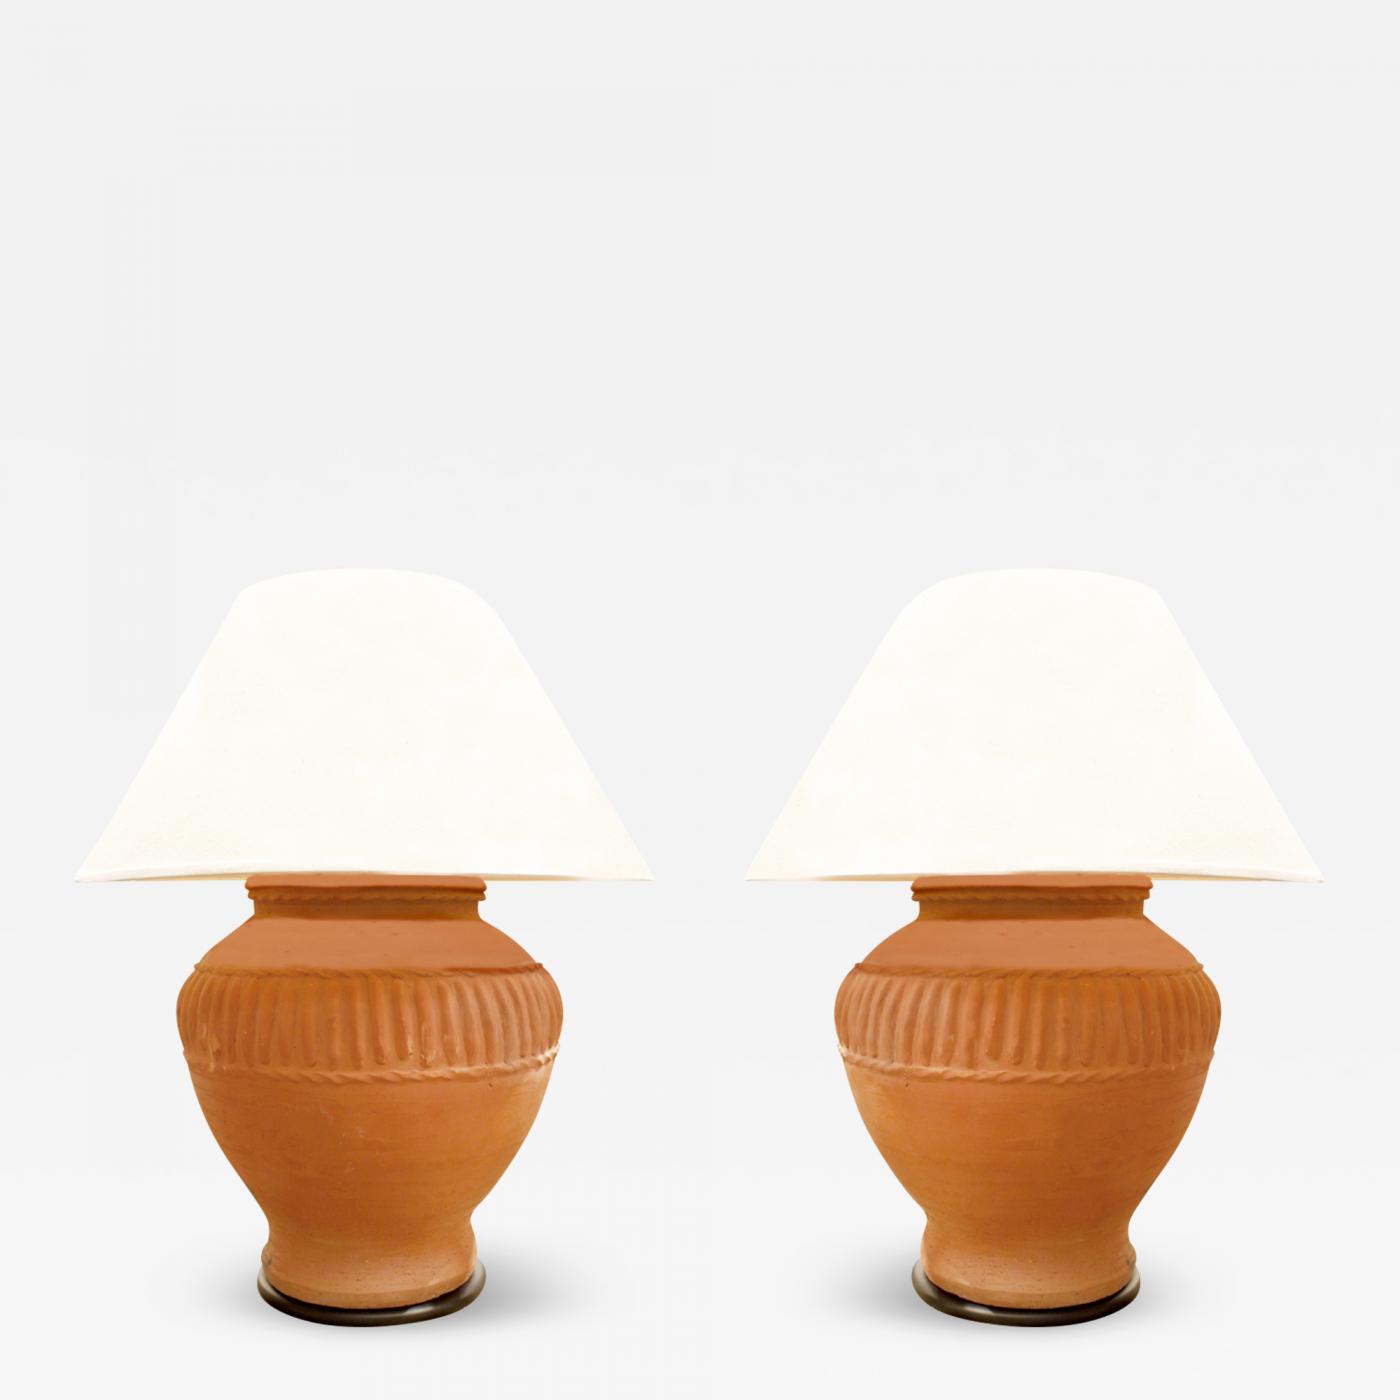 1970s table lamps